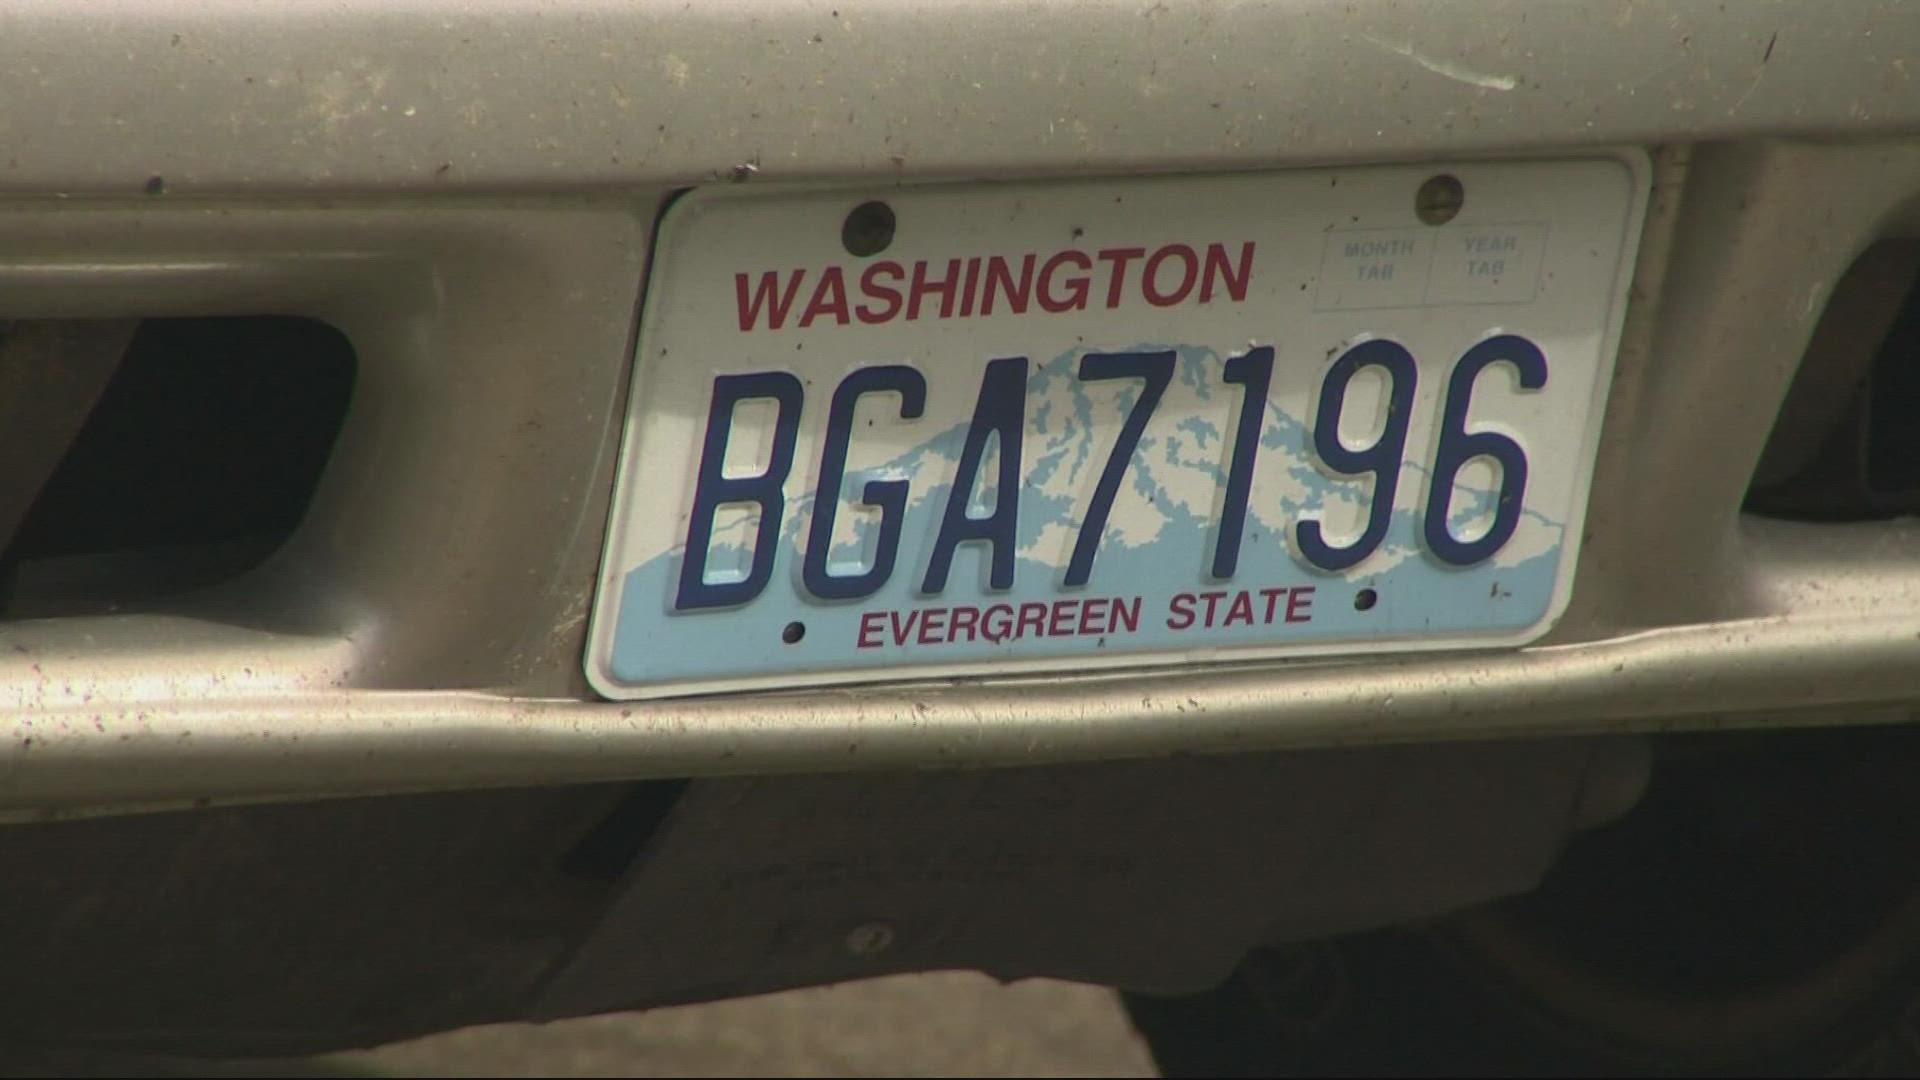 Washington has a shortage of license plates because production within the Department of Corrections is shut down due to COVID-19.